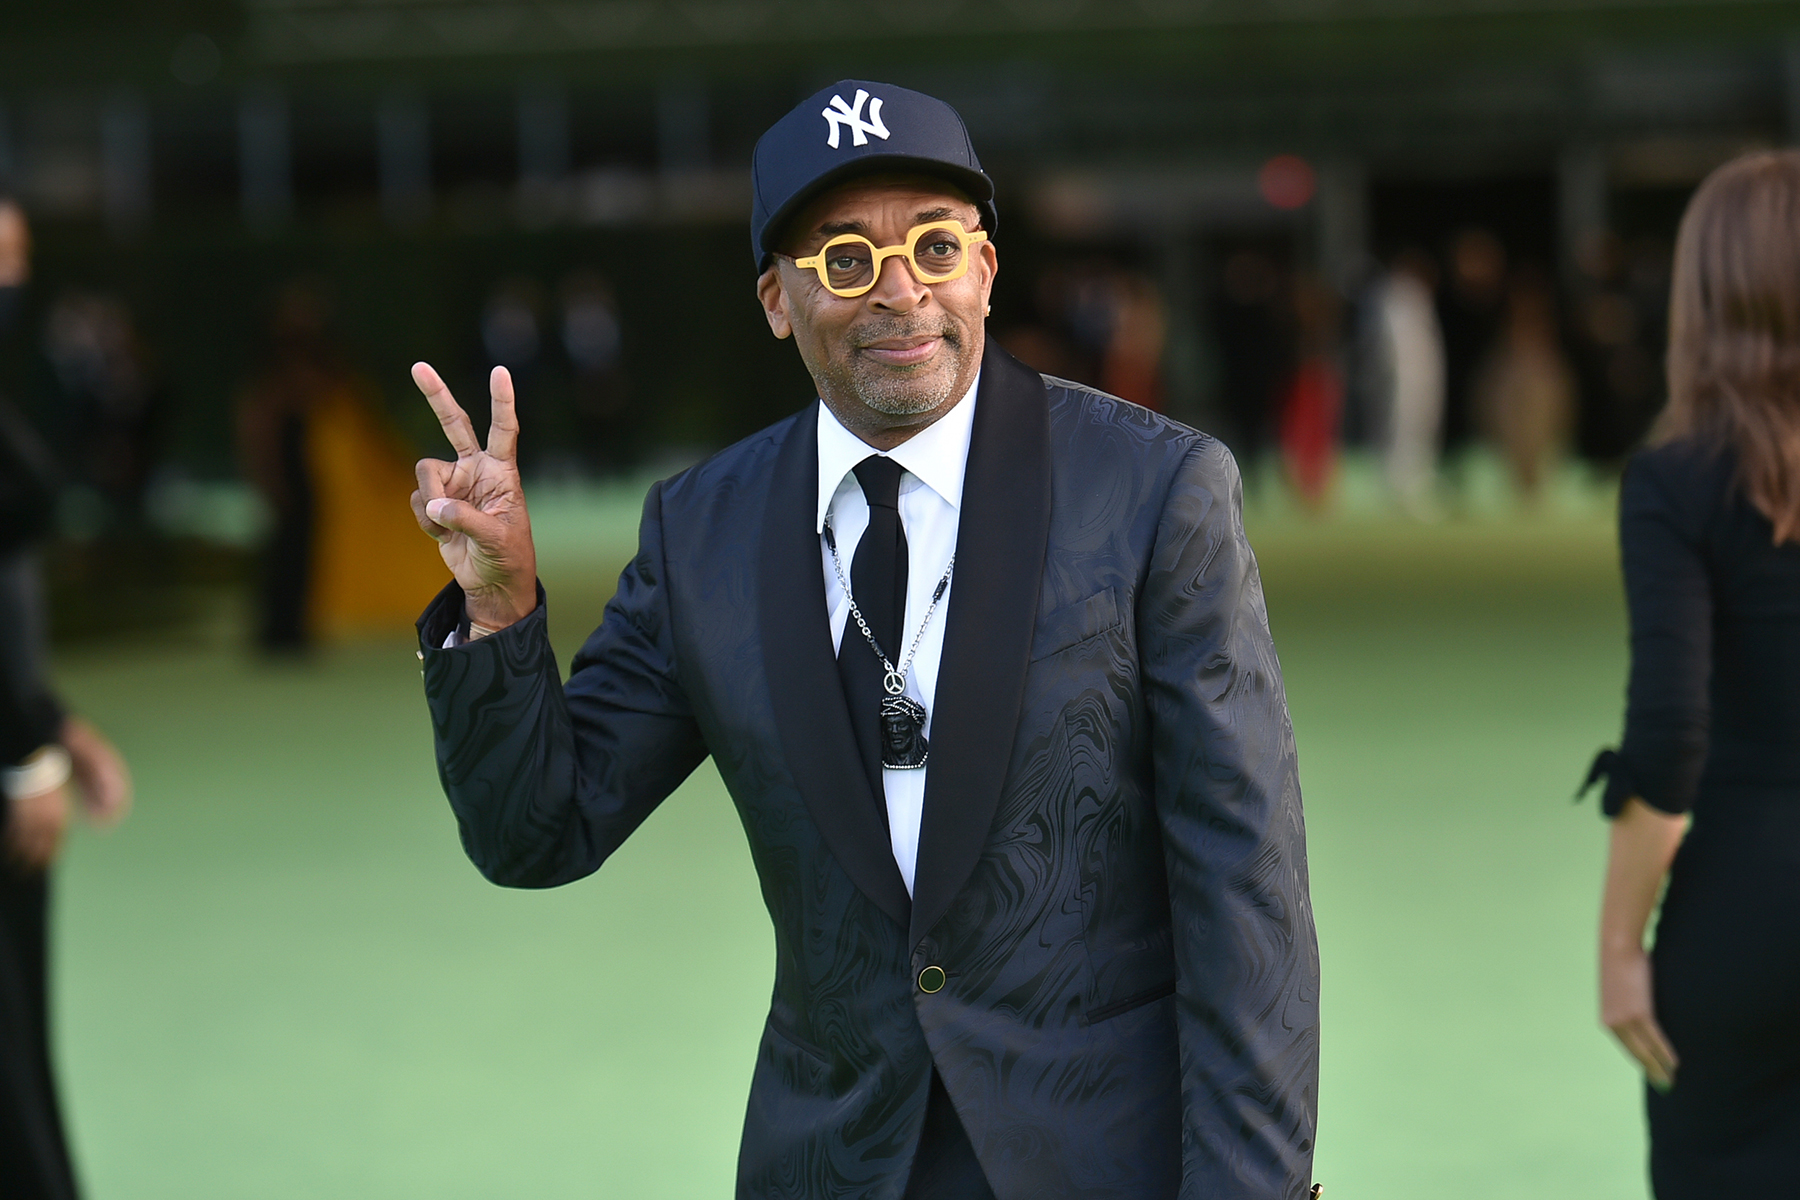 Check Out Spike Lee’s Personal Tour of His Academy Museum Exhibit